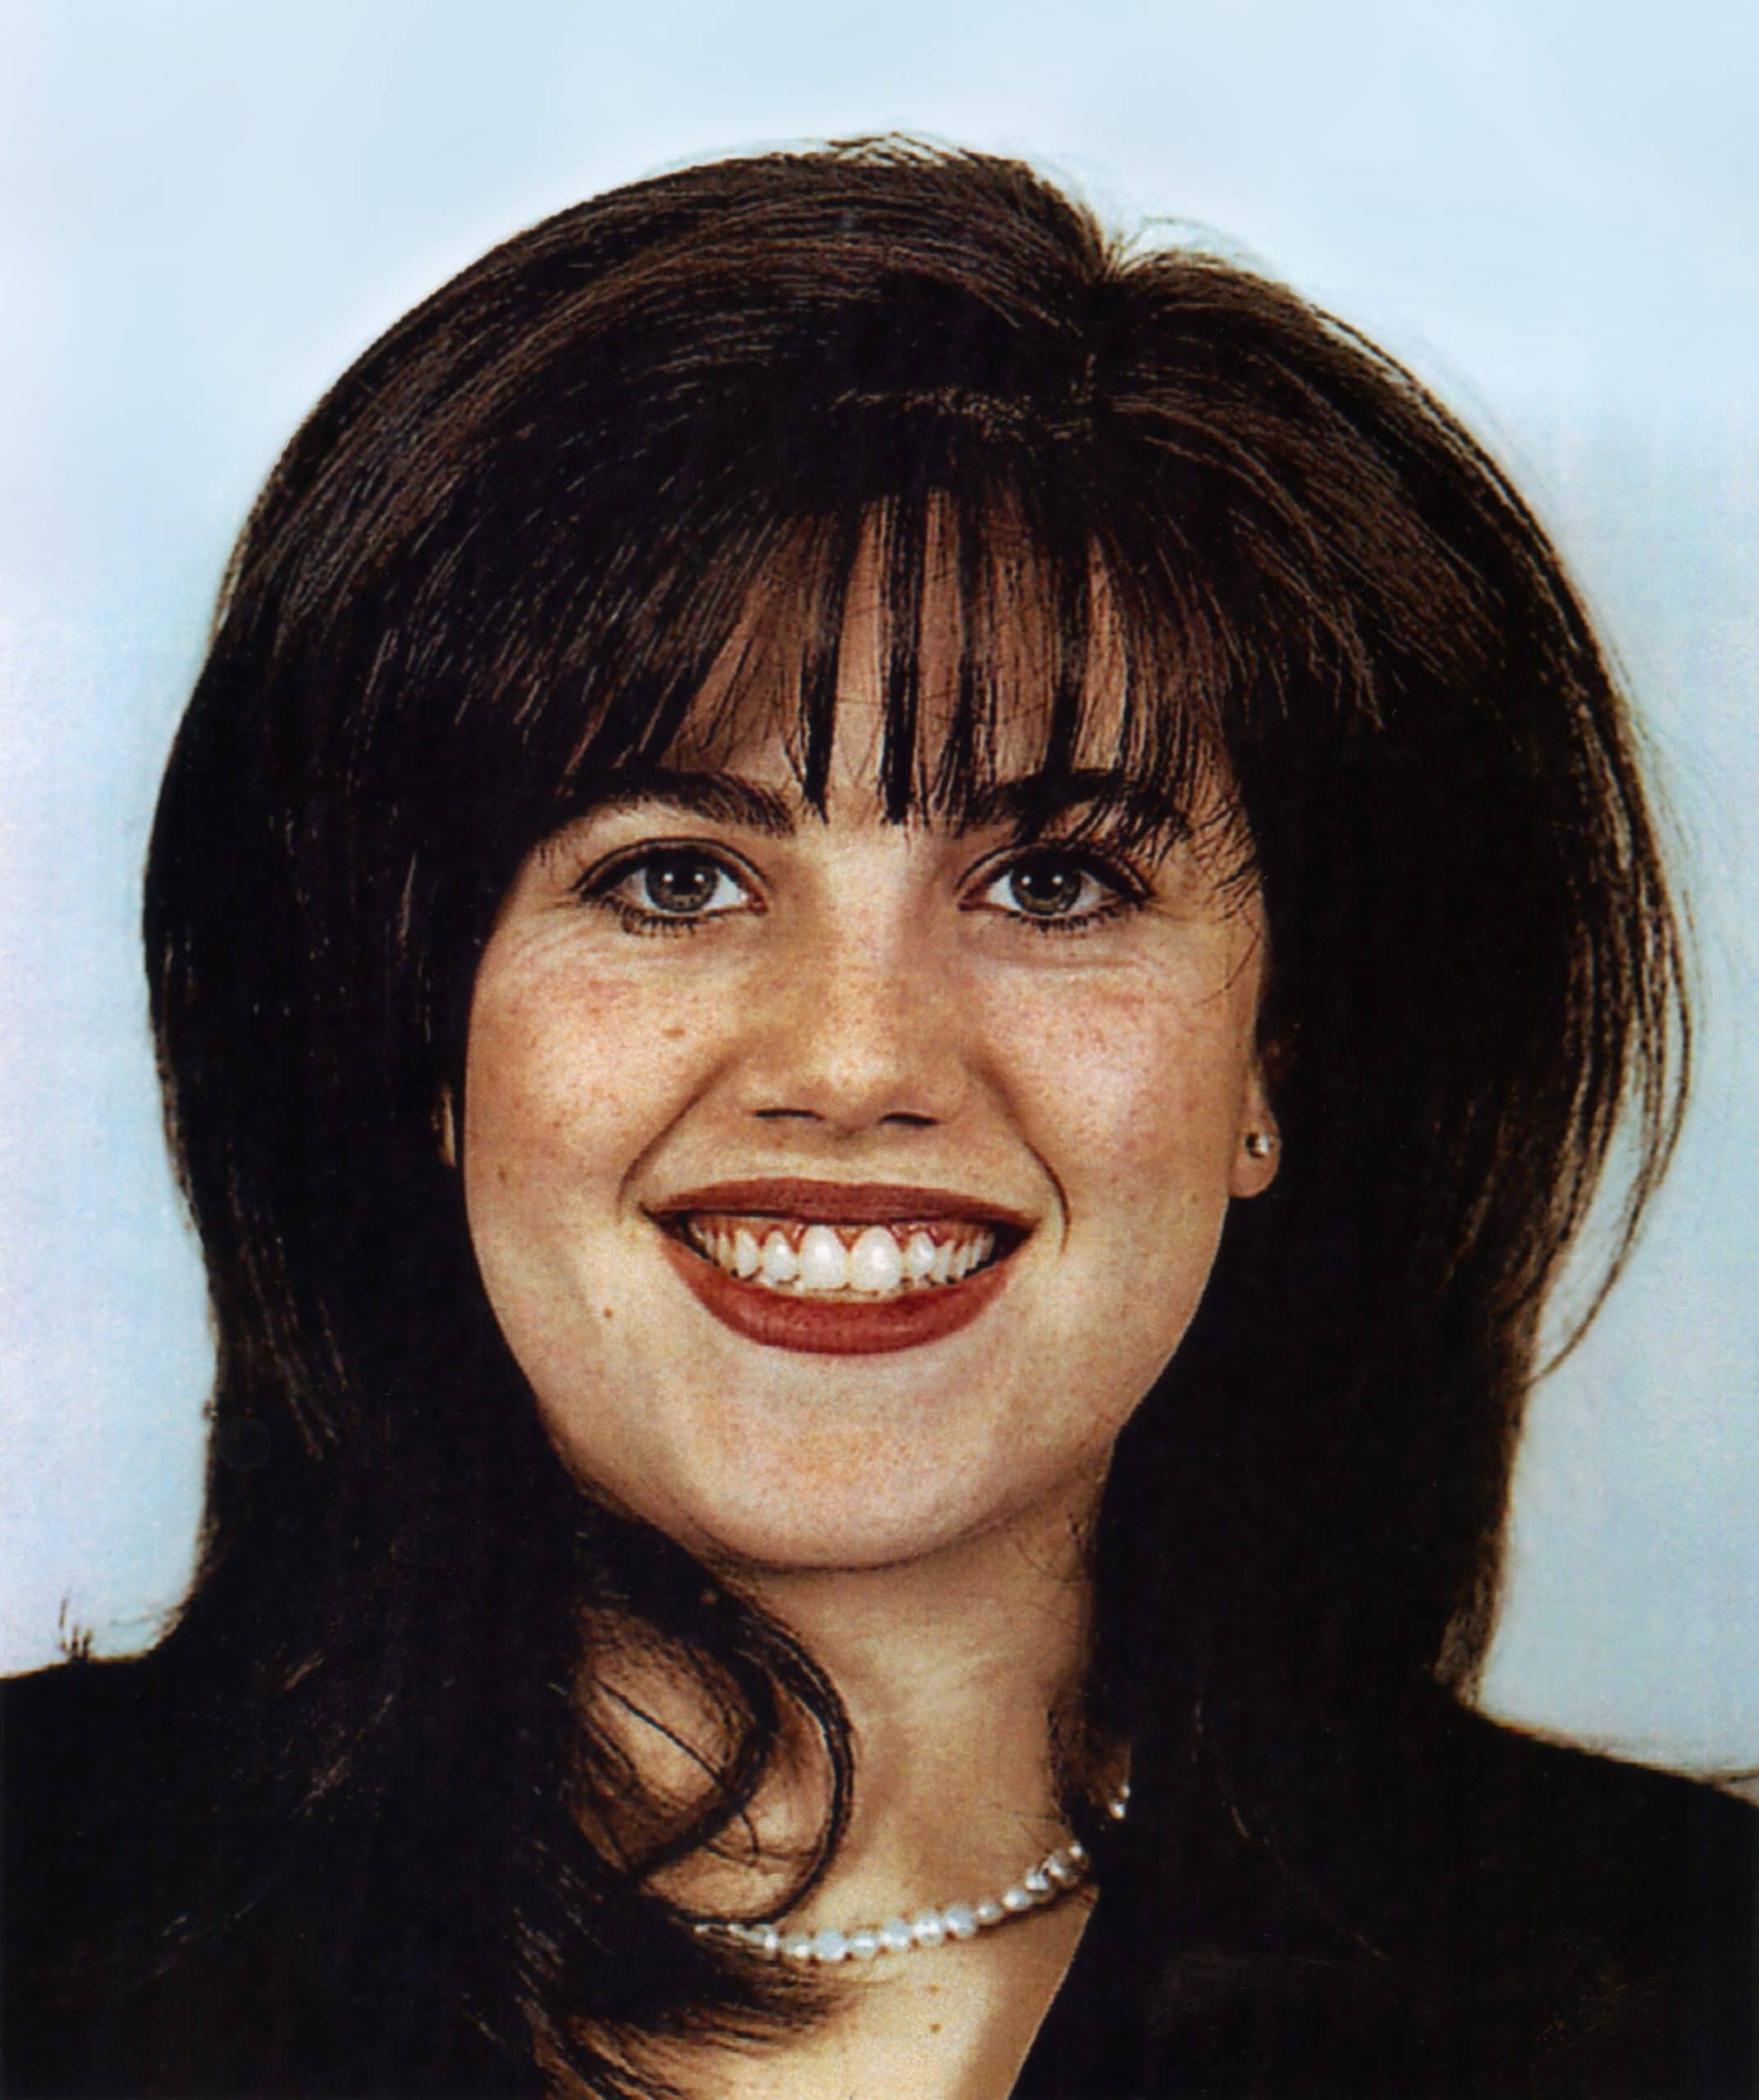 Department of Defense identification photo of Monica Lewinsky from 1996